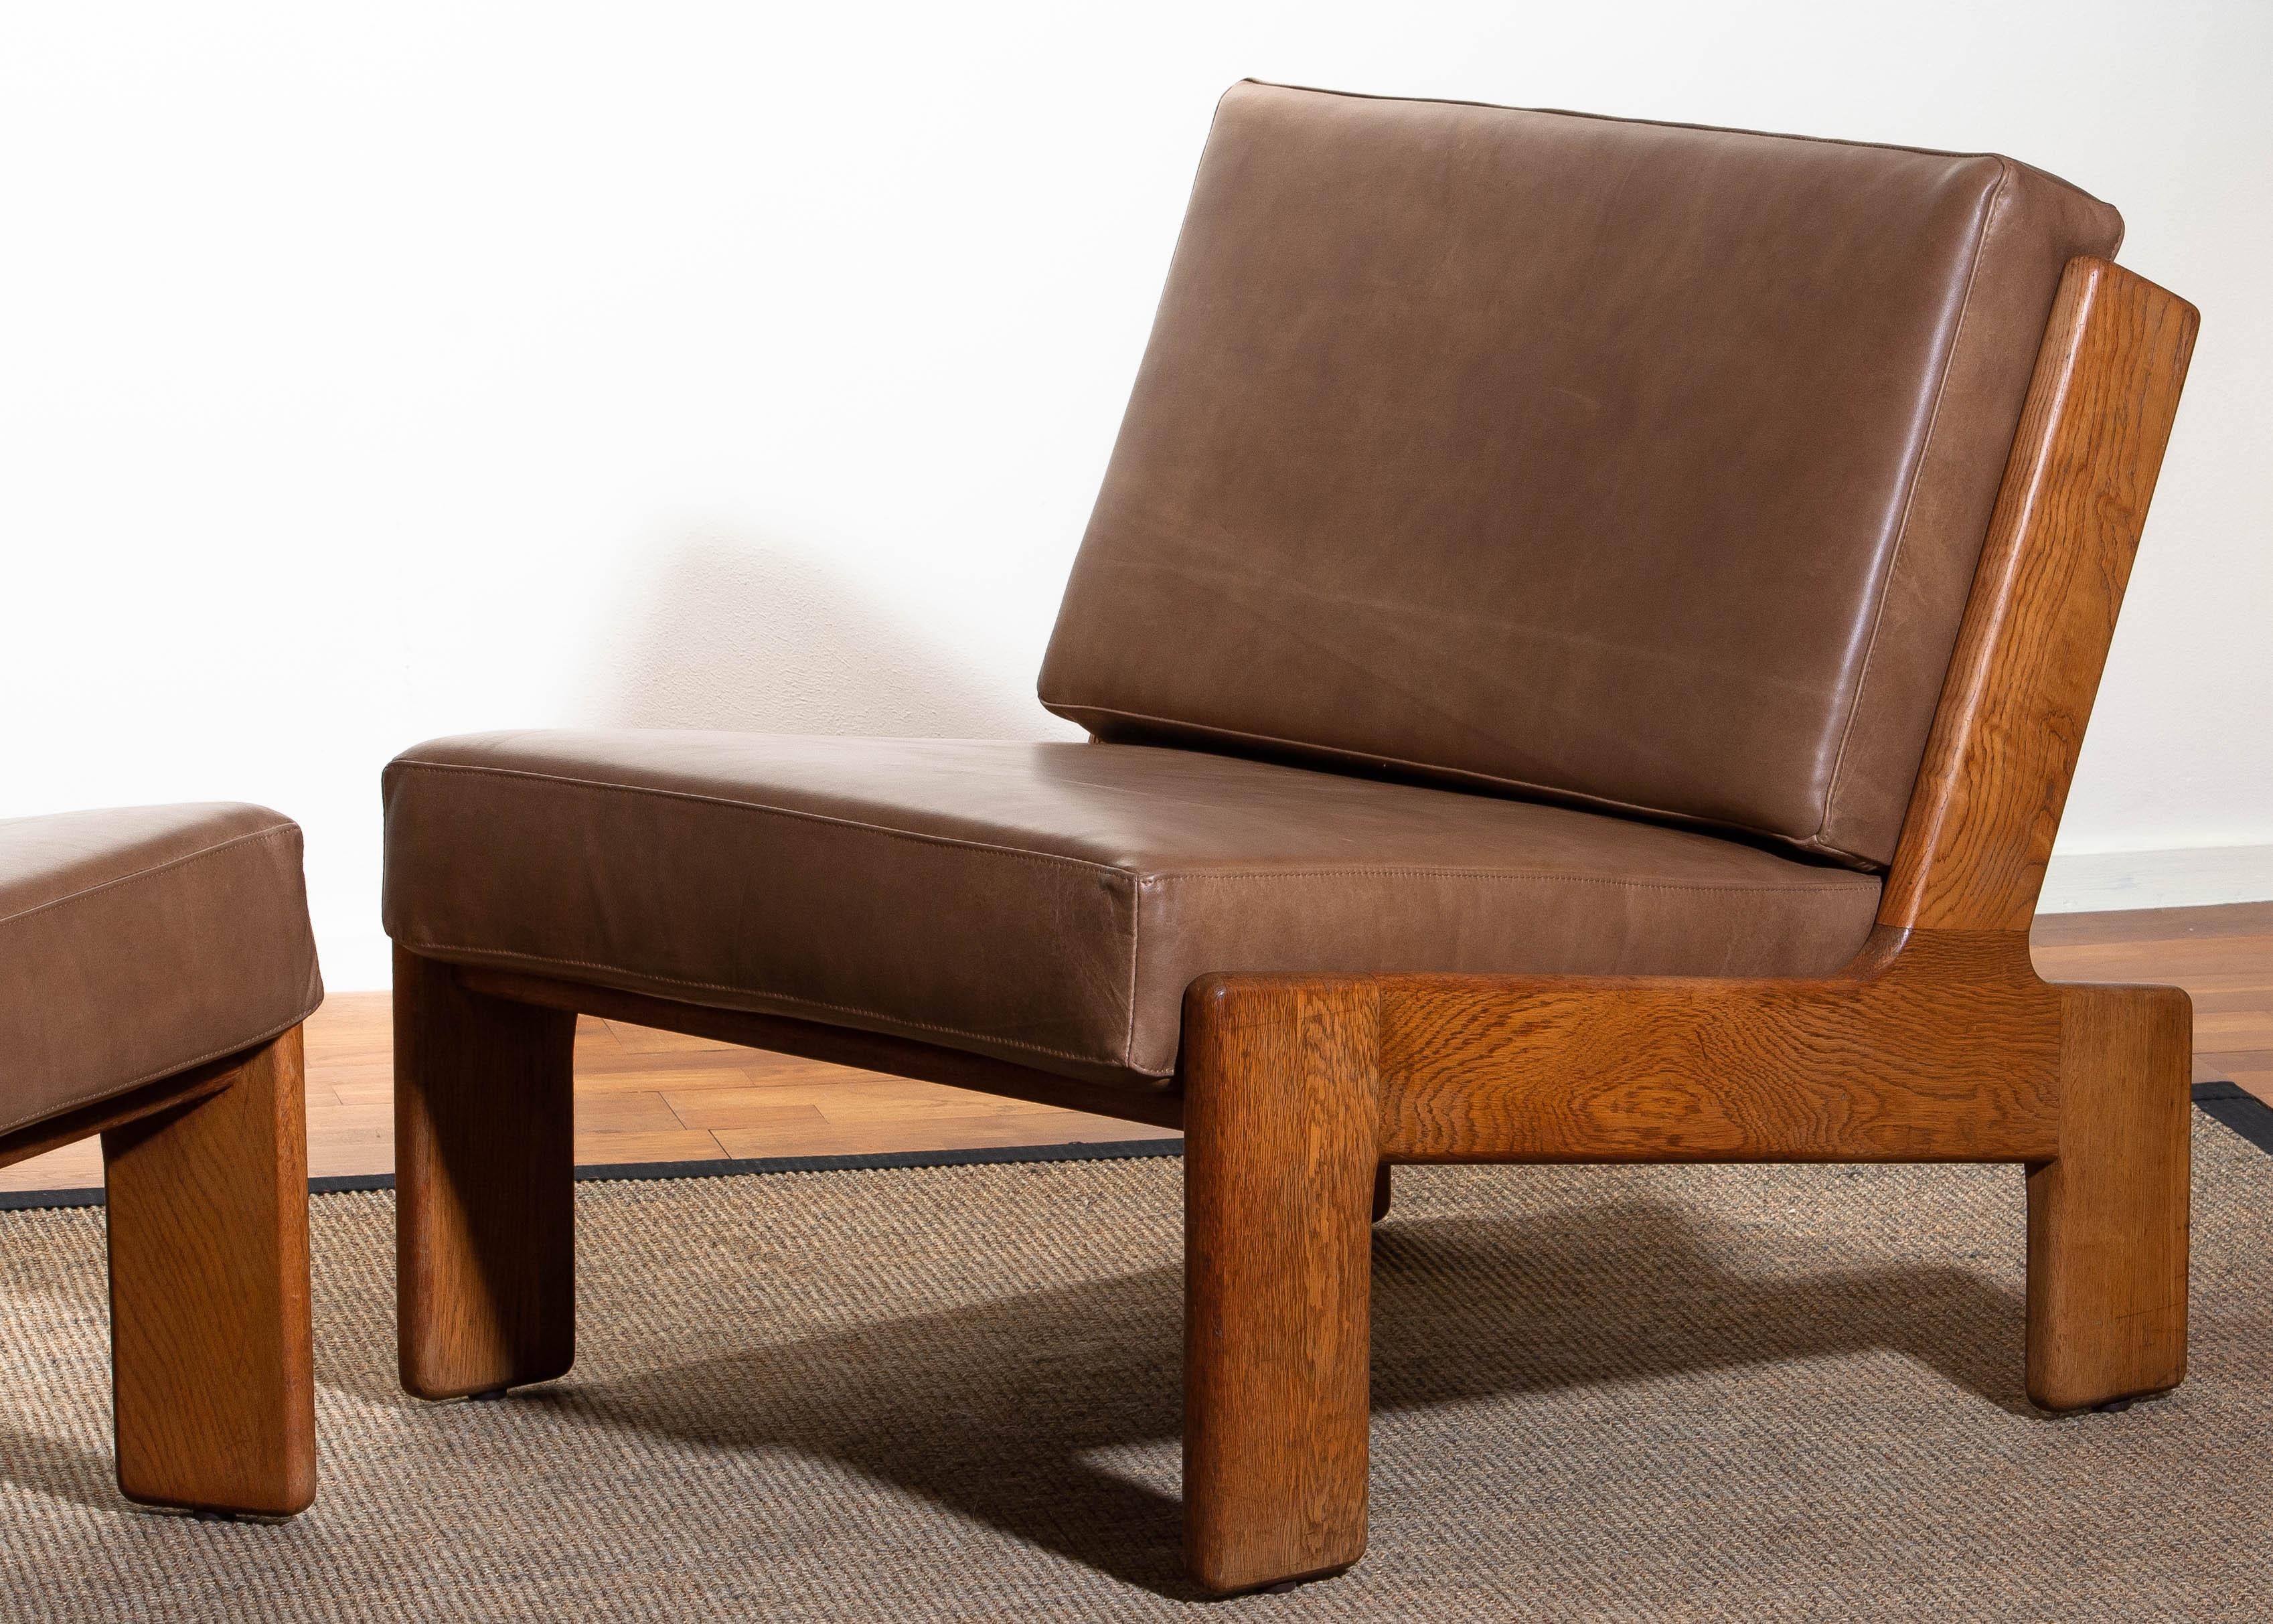 Mid-Century Modern 1960, Pair of Oak and Leather Cubist Lounge Chairs by Esko Pajamies for Asko